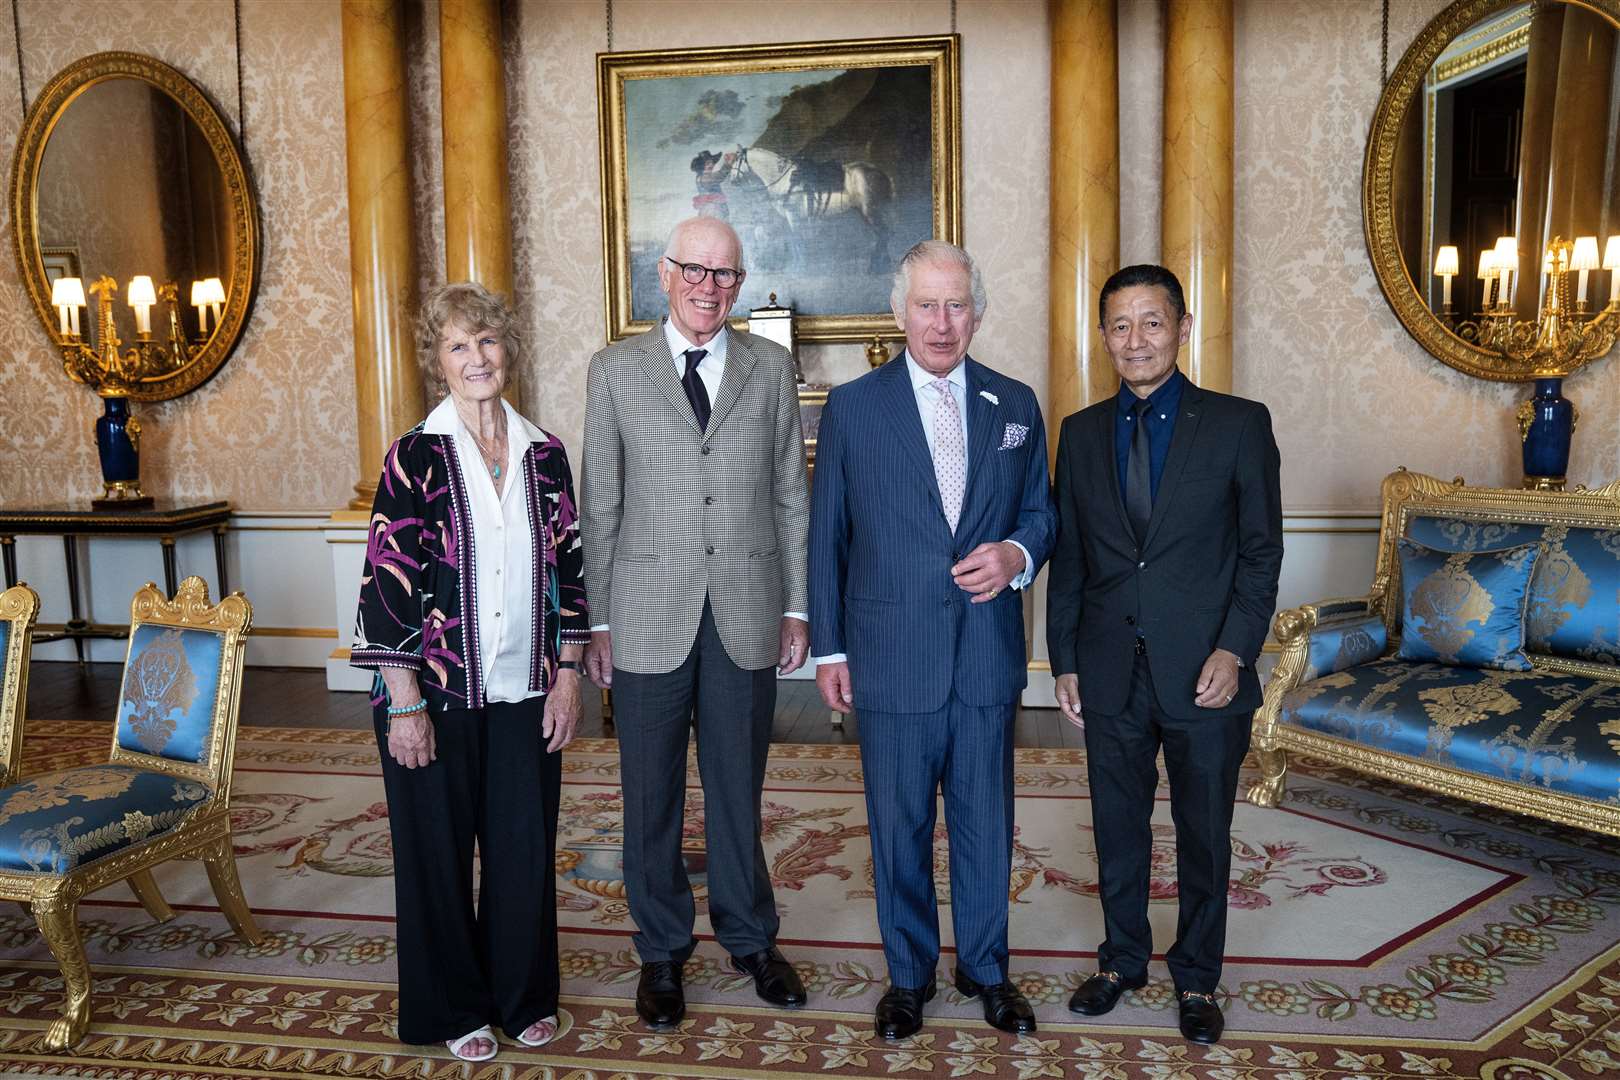 The King receives Sue Leyden, daughter of expedition leader Lord Hunt, Peter Hillary (second left), son of Sir Edmund Hillary, and Jamling Norgay, son of Sherpa guide Tenzing Norgay, during an audience at Buckingham Palace (Victoria Jones/PA)